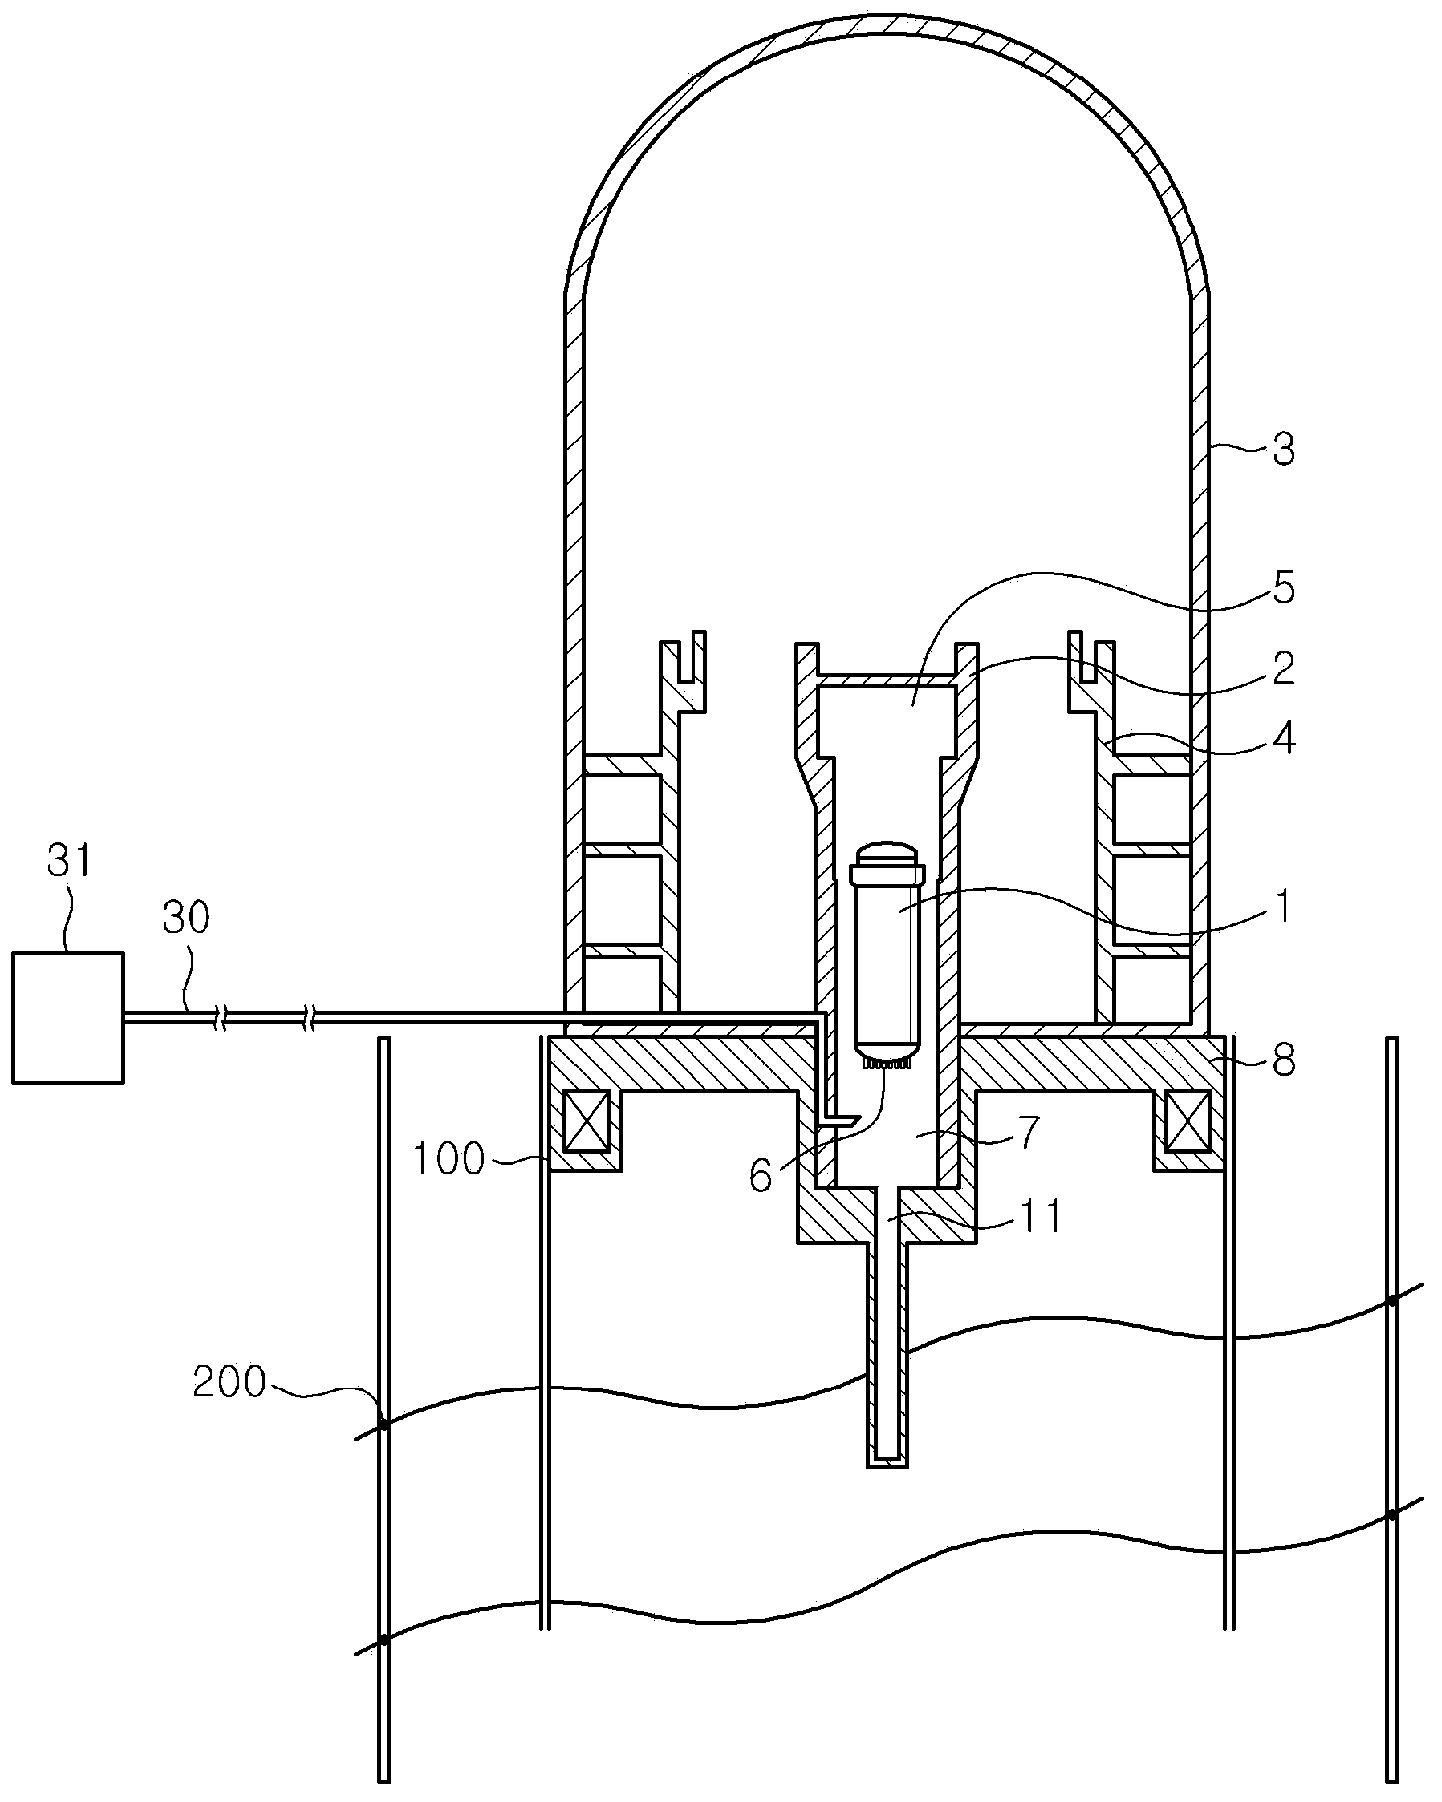 Apparatus for treating molten atomic reactor fuel rod using vertical cavity